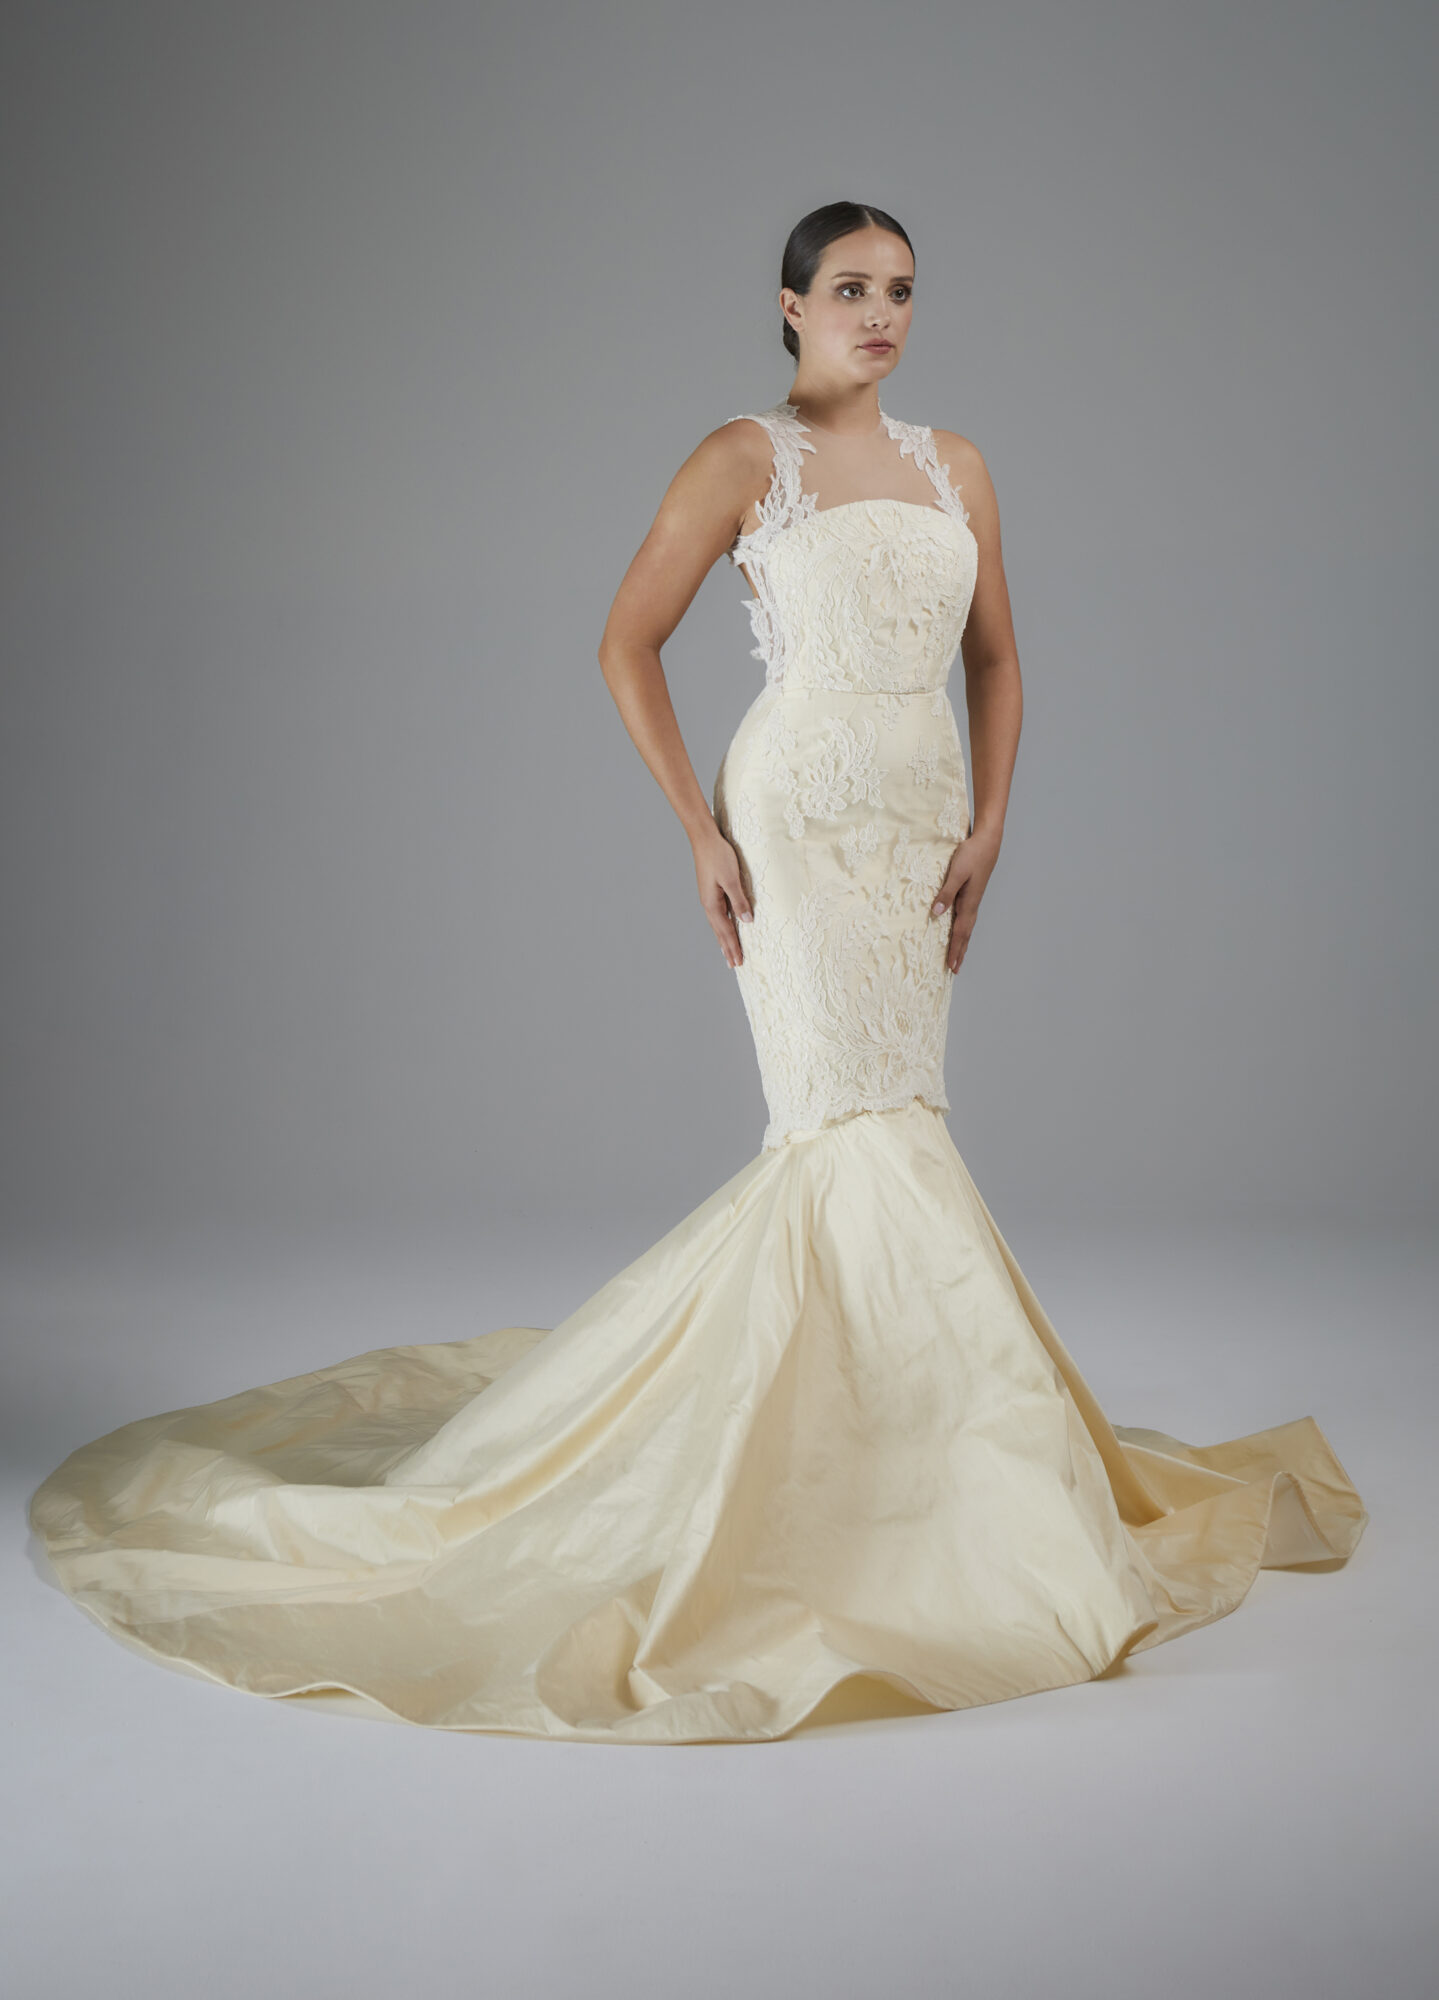 10 Great Wedding Dress Styles for Short Brides